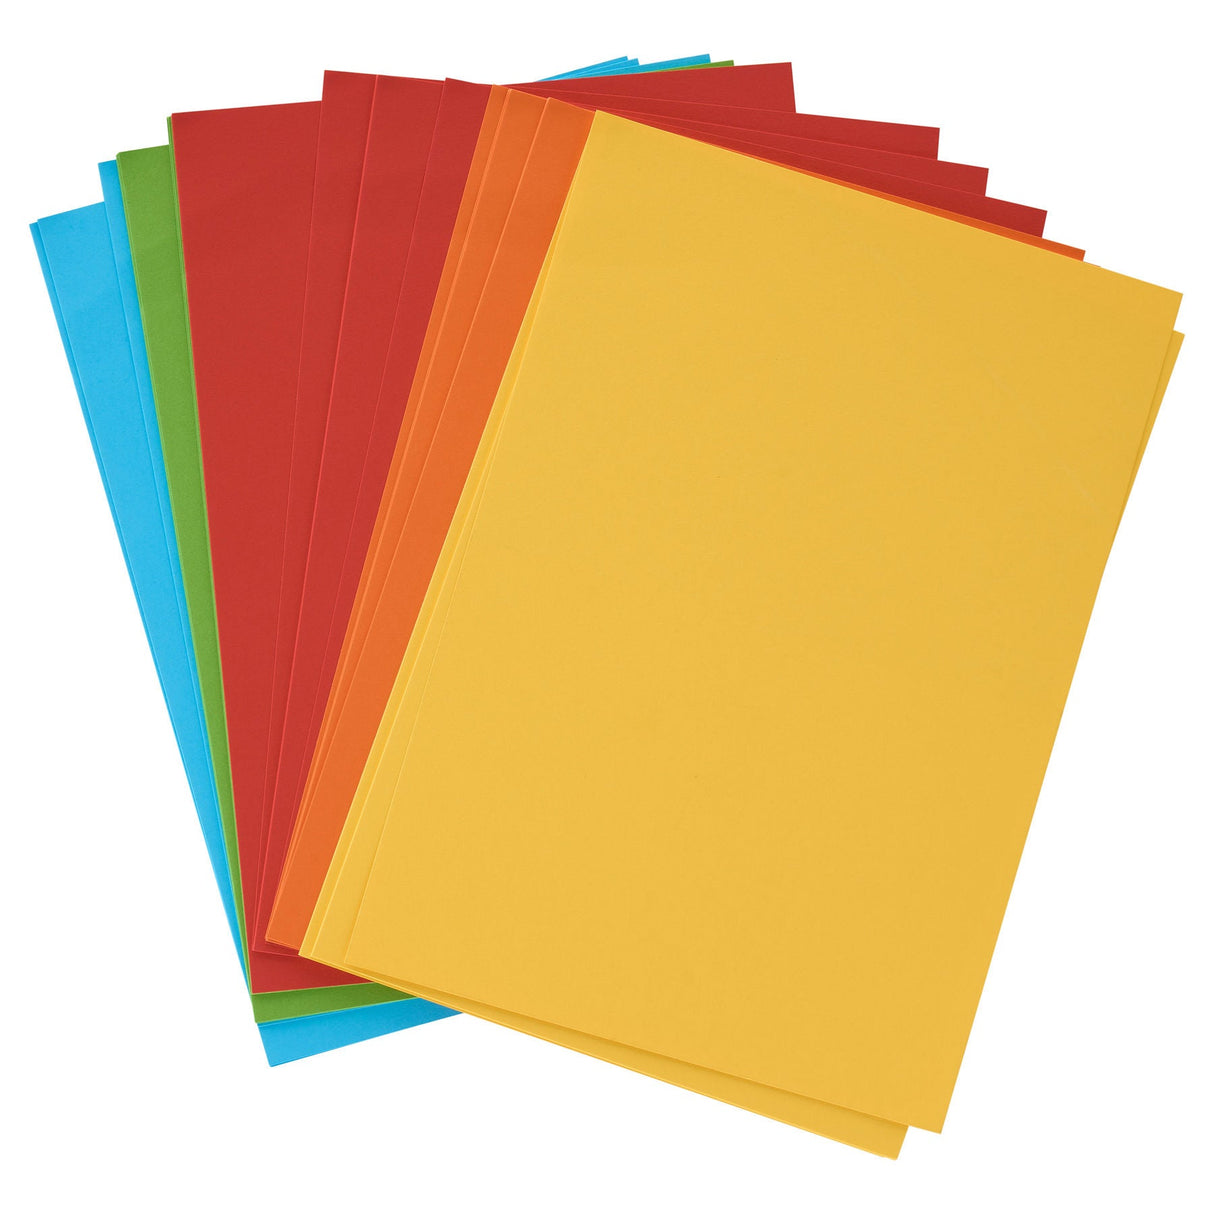 Premier Activity A4 Card - 160 gsm - Rainbow - 50 Sheets-Craft Paper & Card-Premier | Buy Online at Stationery Shop